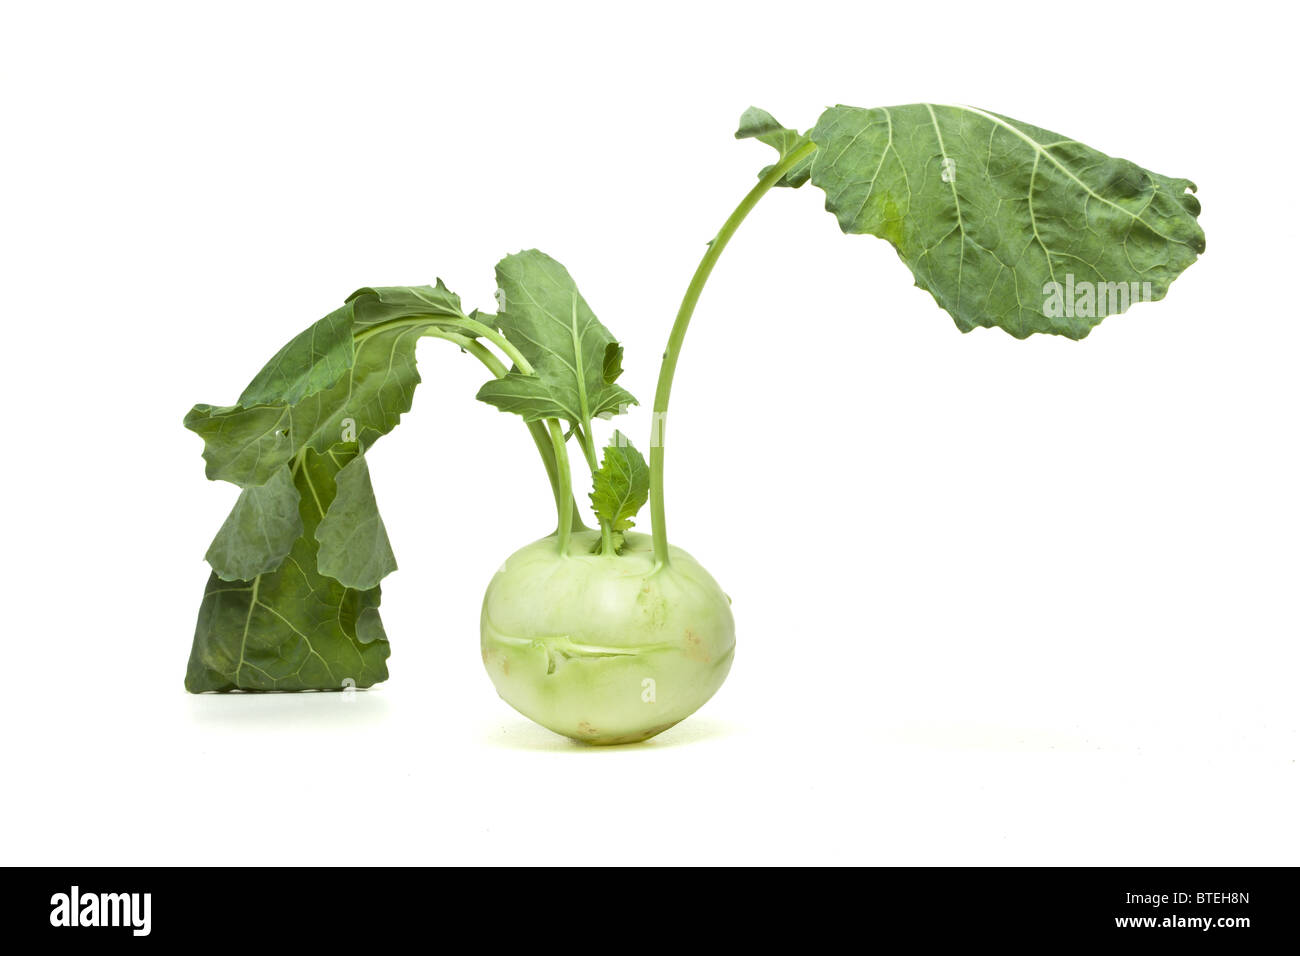 German Turnip with leaf from low perspective isolated on white. Stock Photo